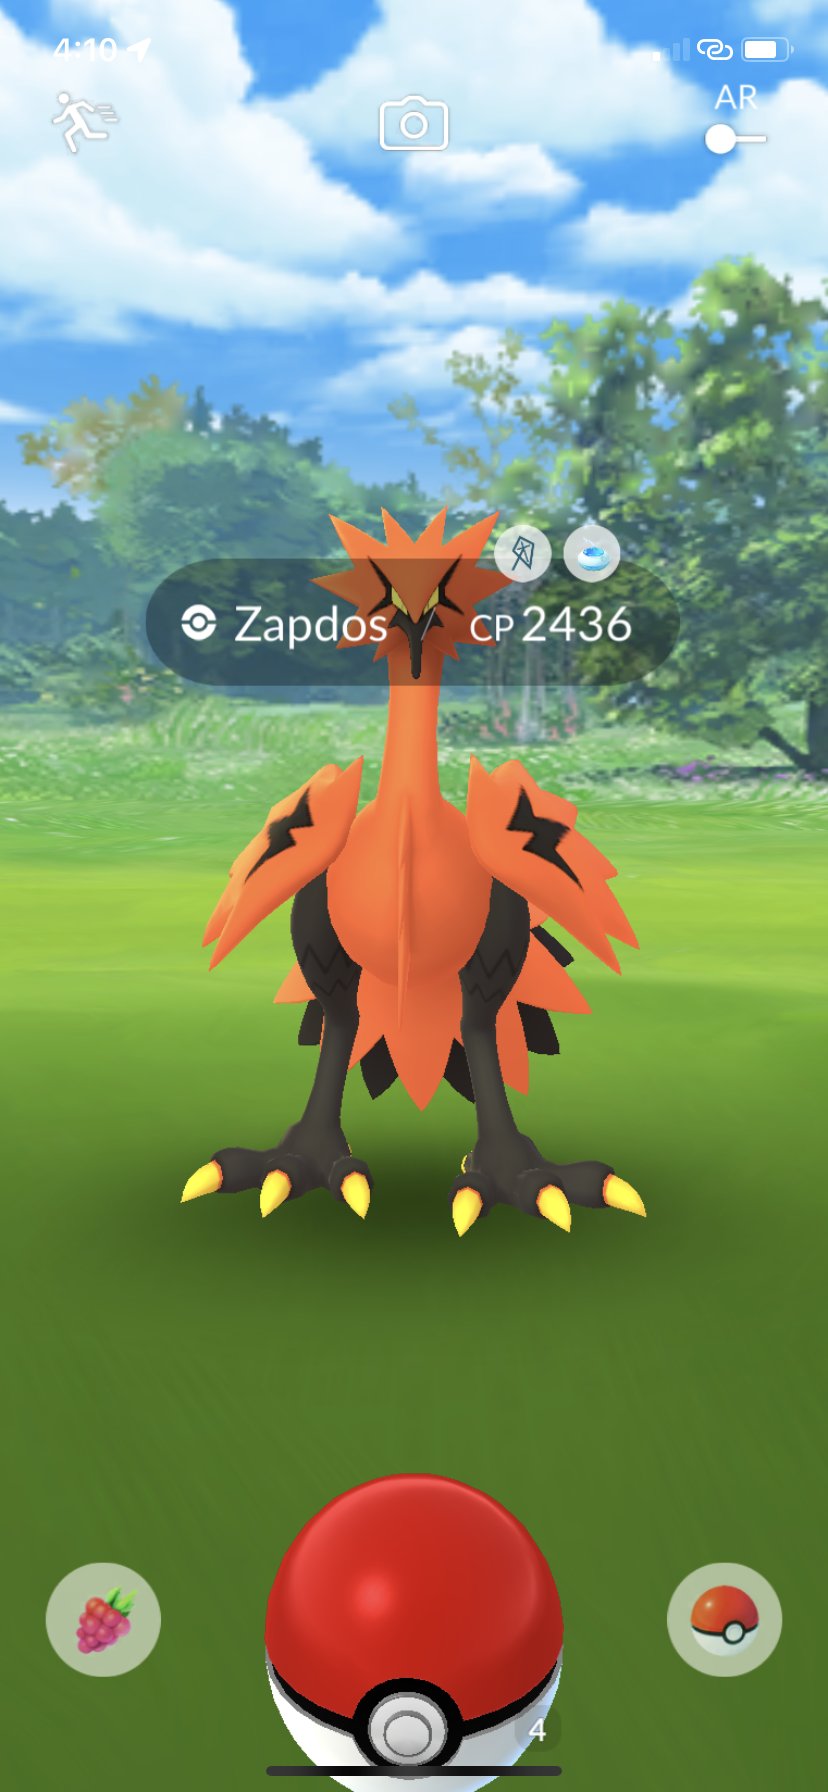 Leek Duck 🦆 on X: Mewtwo, Articuno, Zapdos, and Moltres return